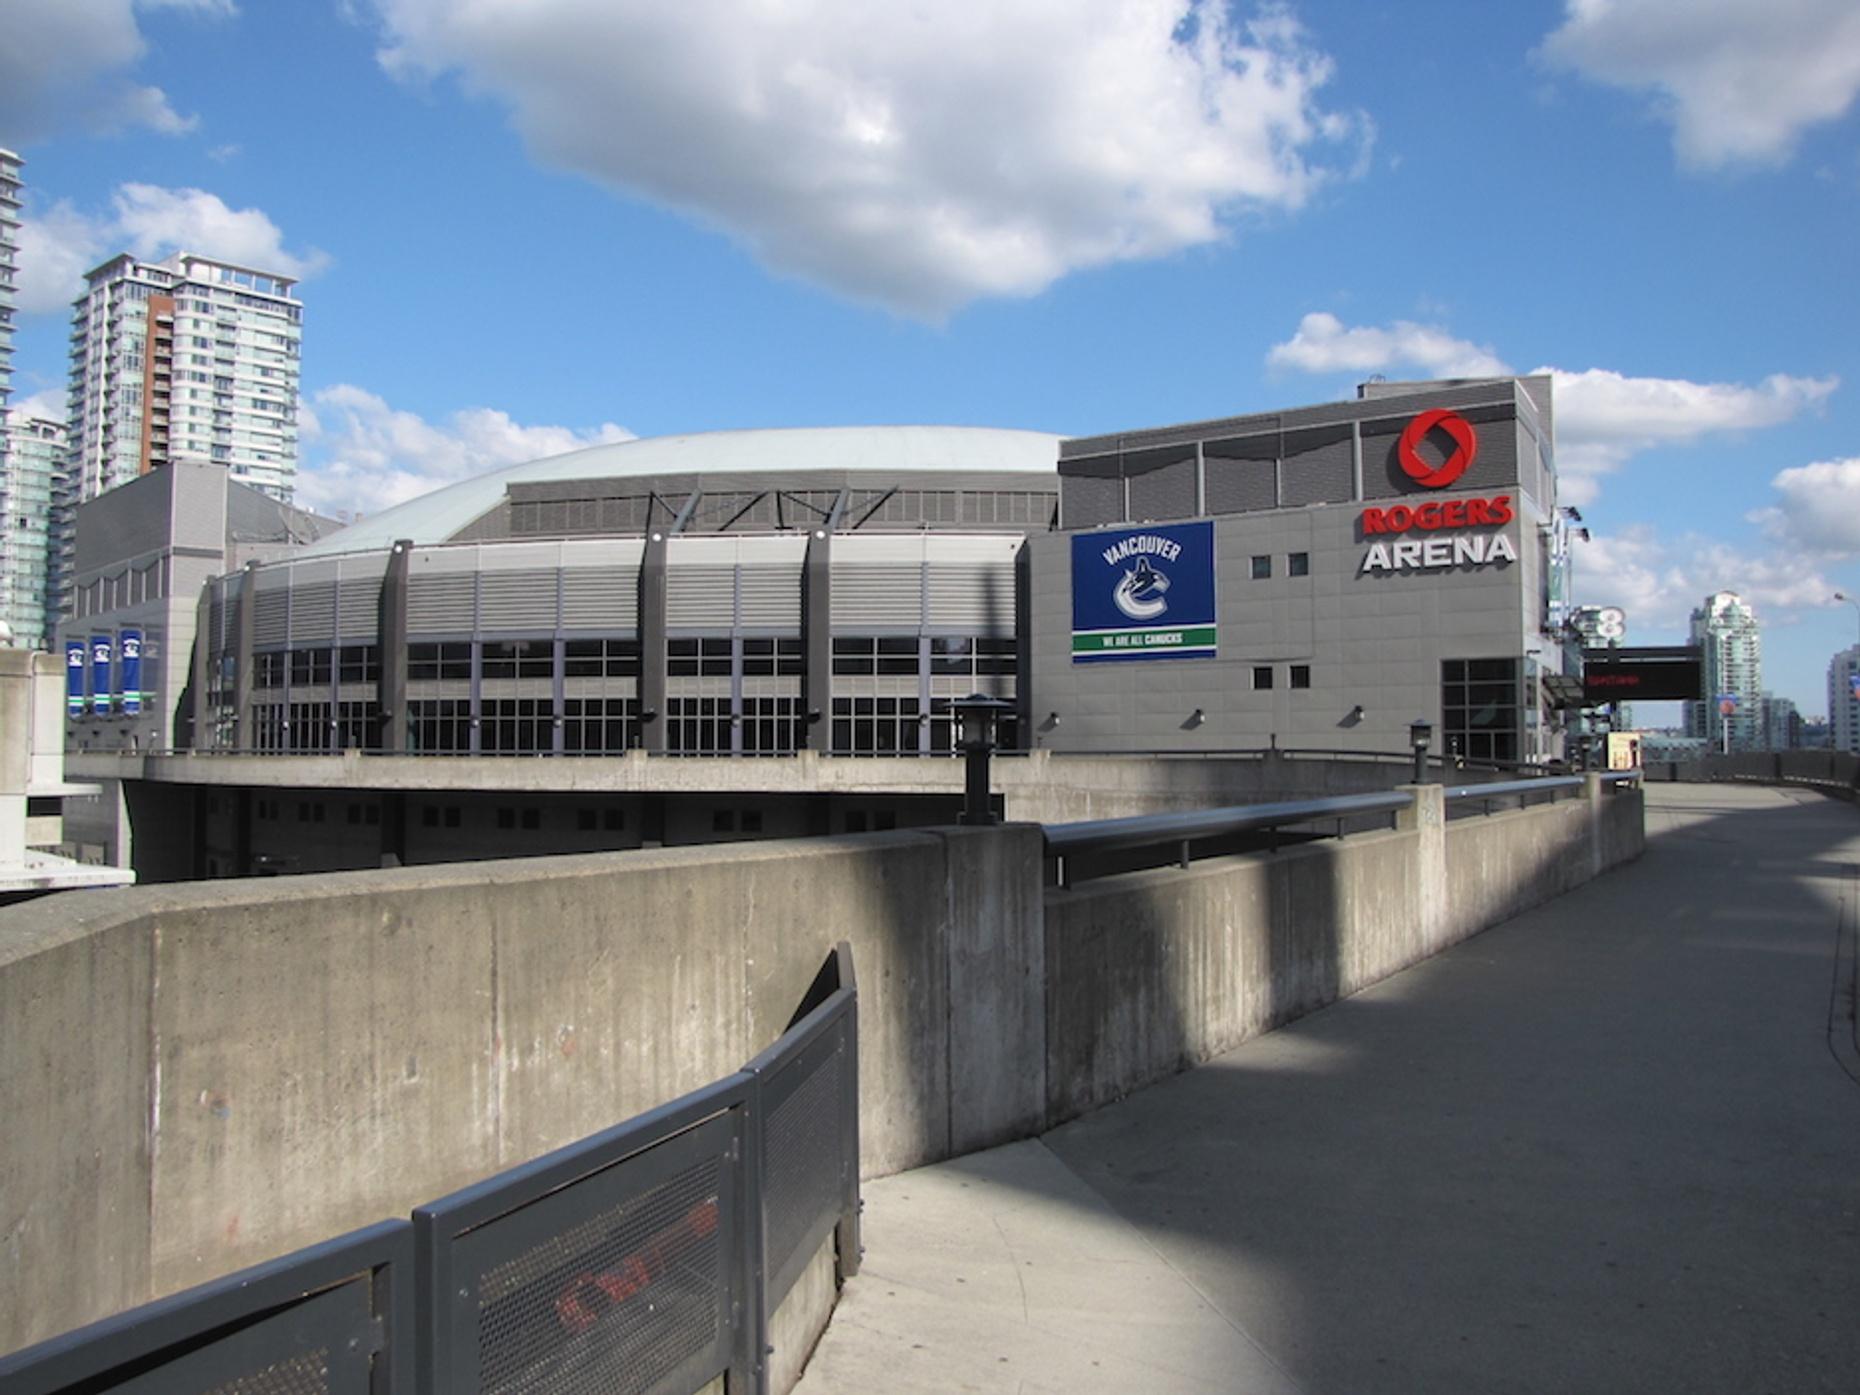 Rogers Arena Guided Tour in Vancouver Book Tours & Activities at